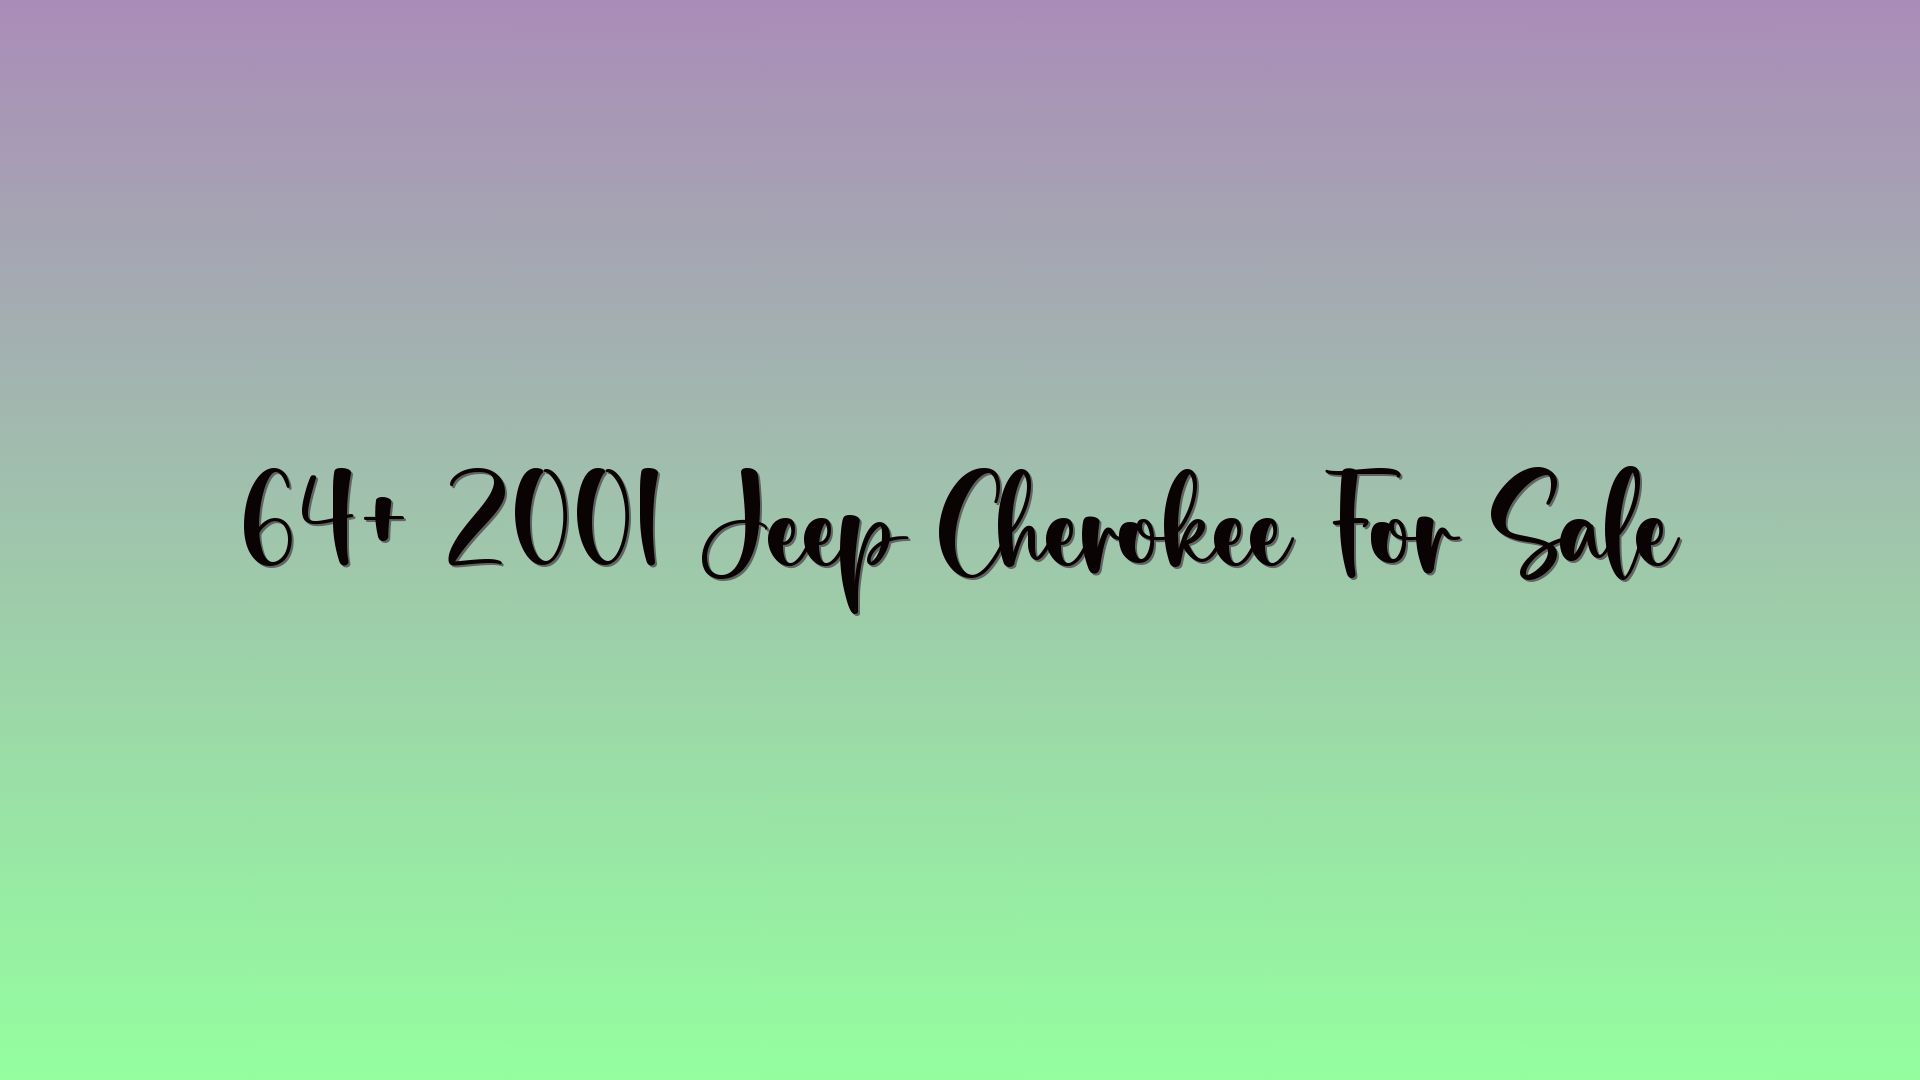 64+ 2001 Jeep Cherokee For Sale